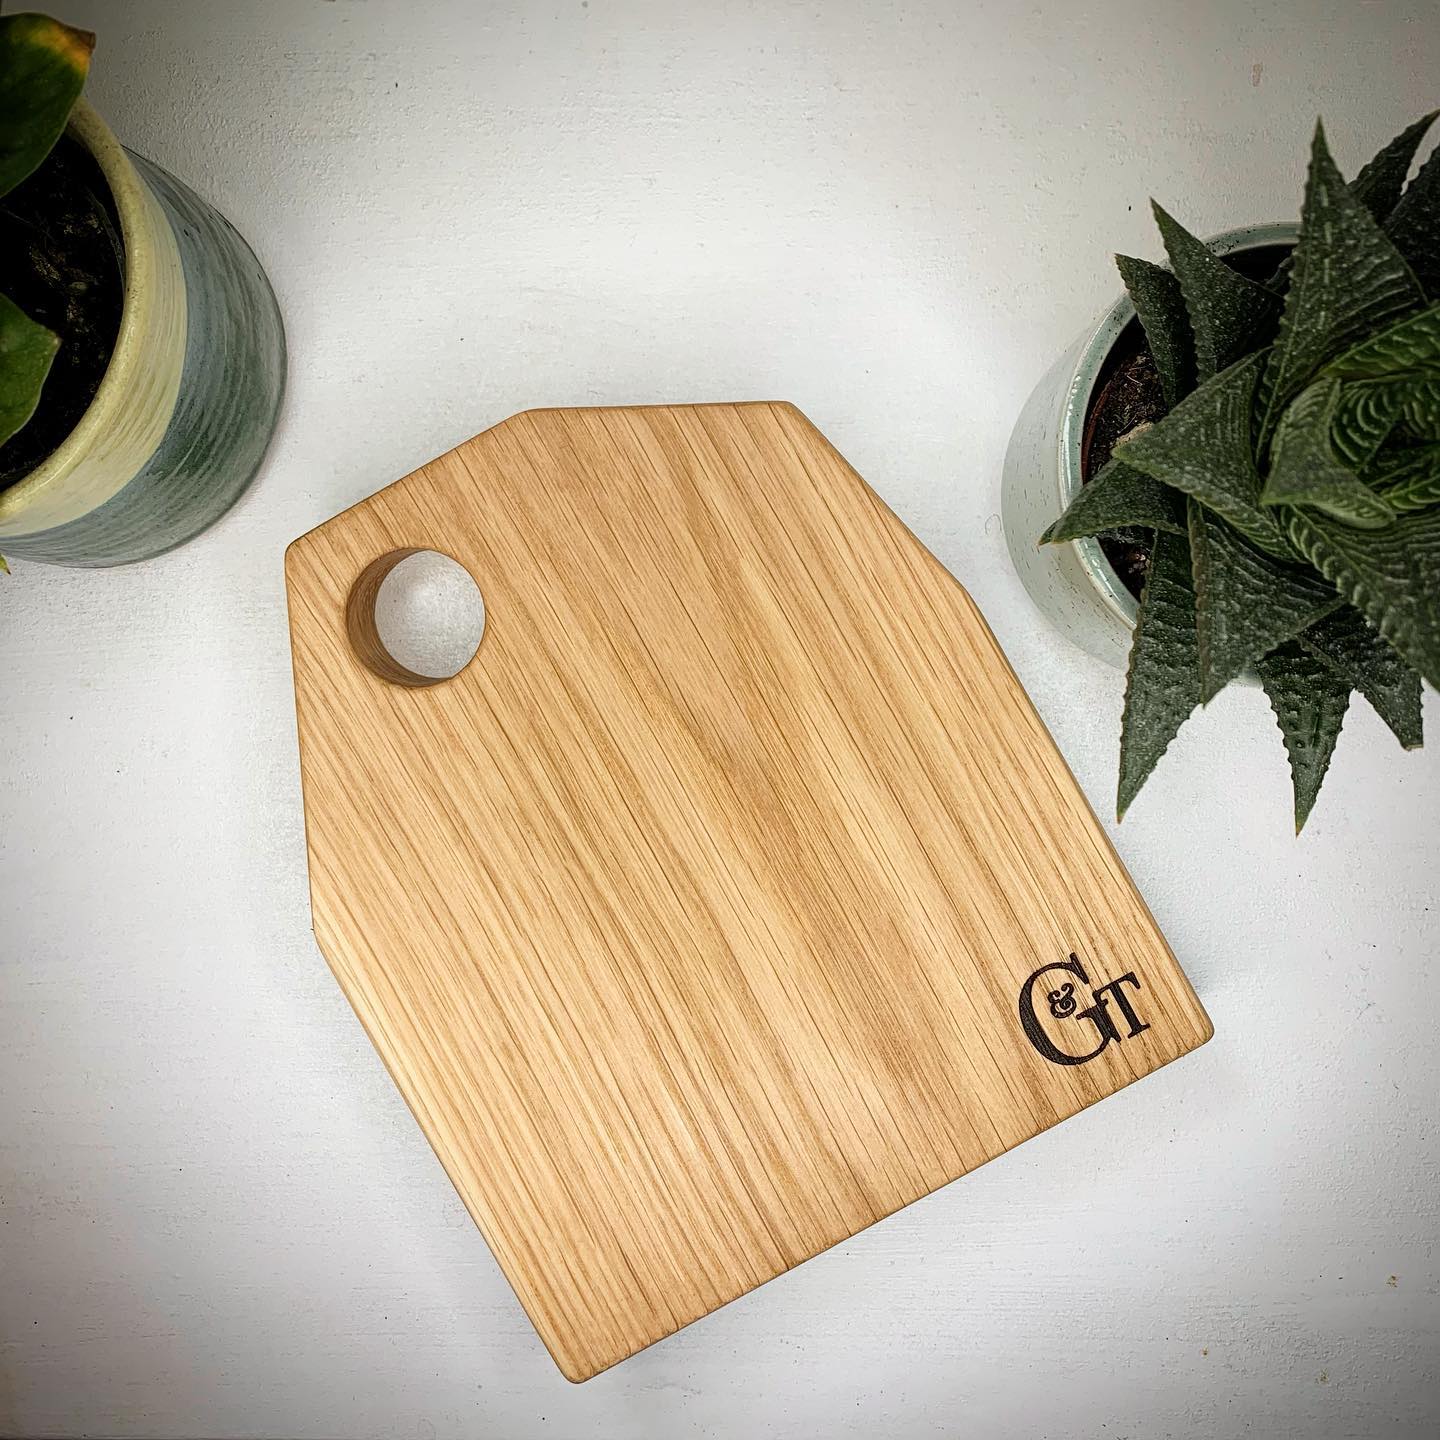 We were overwhelmed by the incredible reaction to our quirky oak boards, so we’ve decided to post a few for sale before our next market. Each photo is numbered and marked with approximate measurements. ️️️ If you’d like one, please comment below with SOLD and the number and we’ll get in touch 🙂£8.50 each with free UK only postage..#lovetocook #handcrafted #homedecor #beunique #oak #oneofakind #ginger #tweed #kitchen #giftideas #gandt #smallbusiness